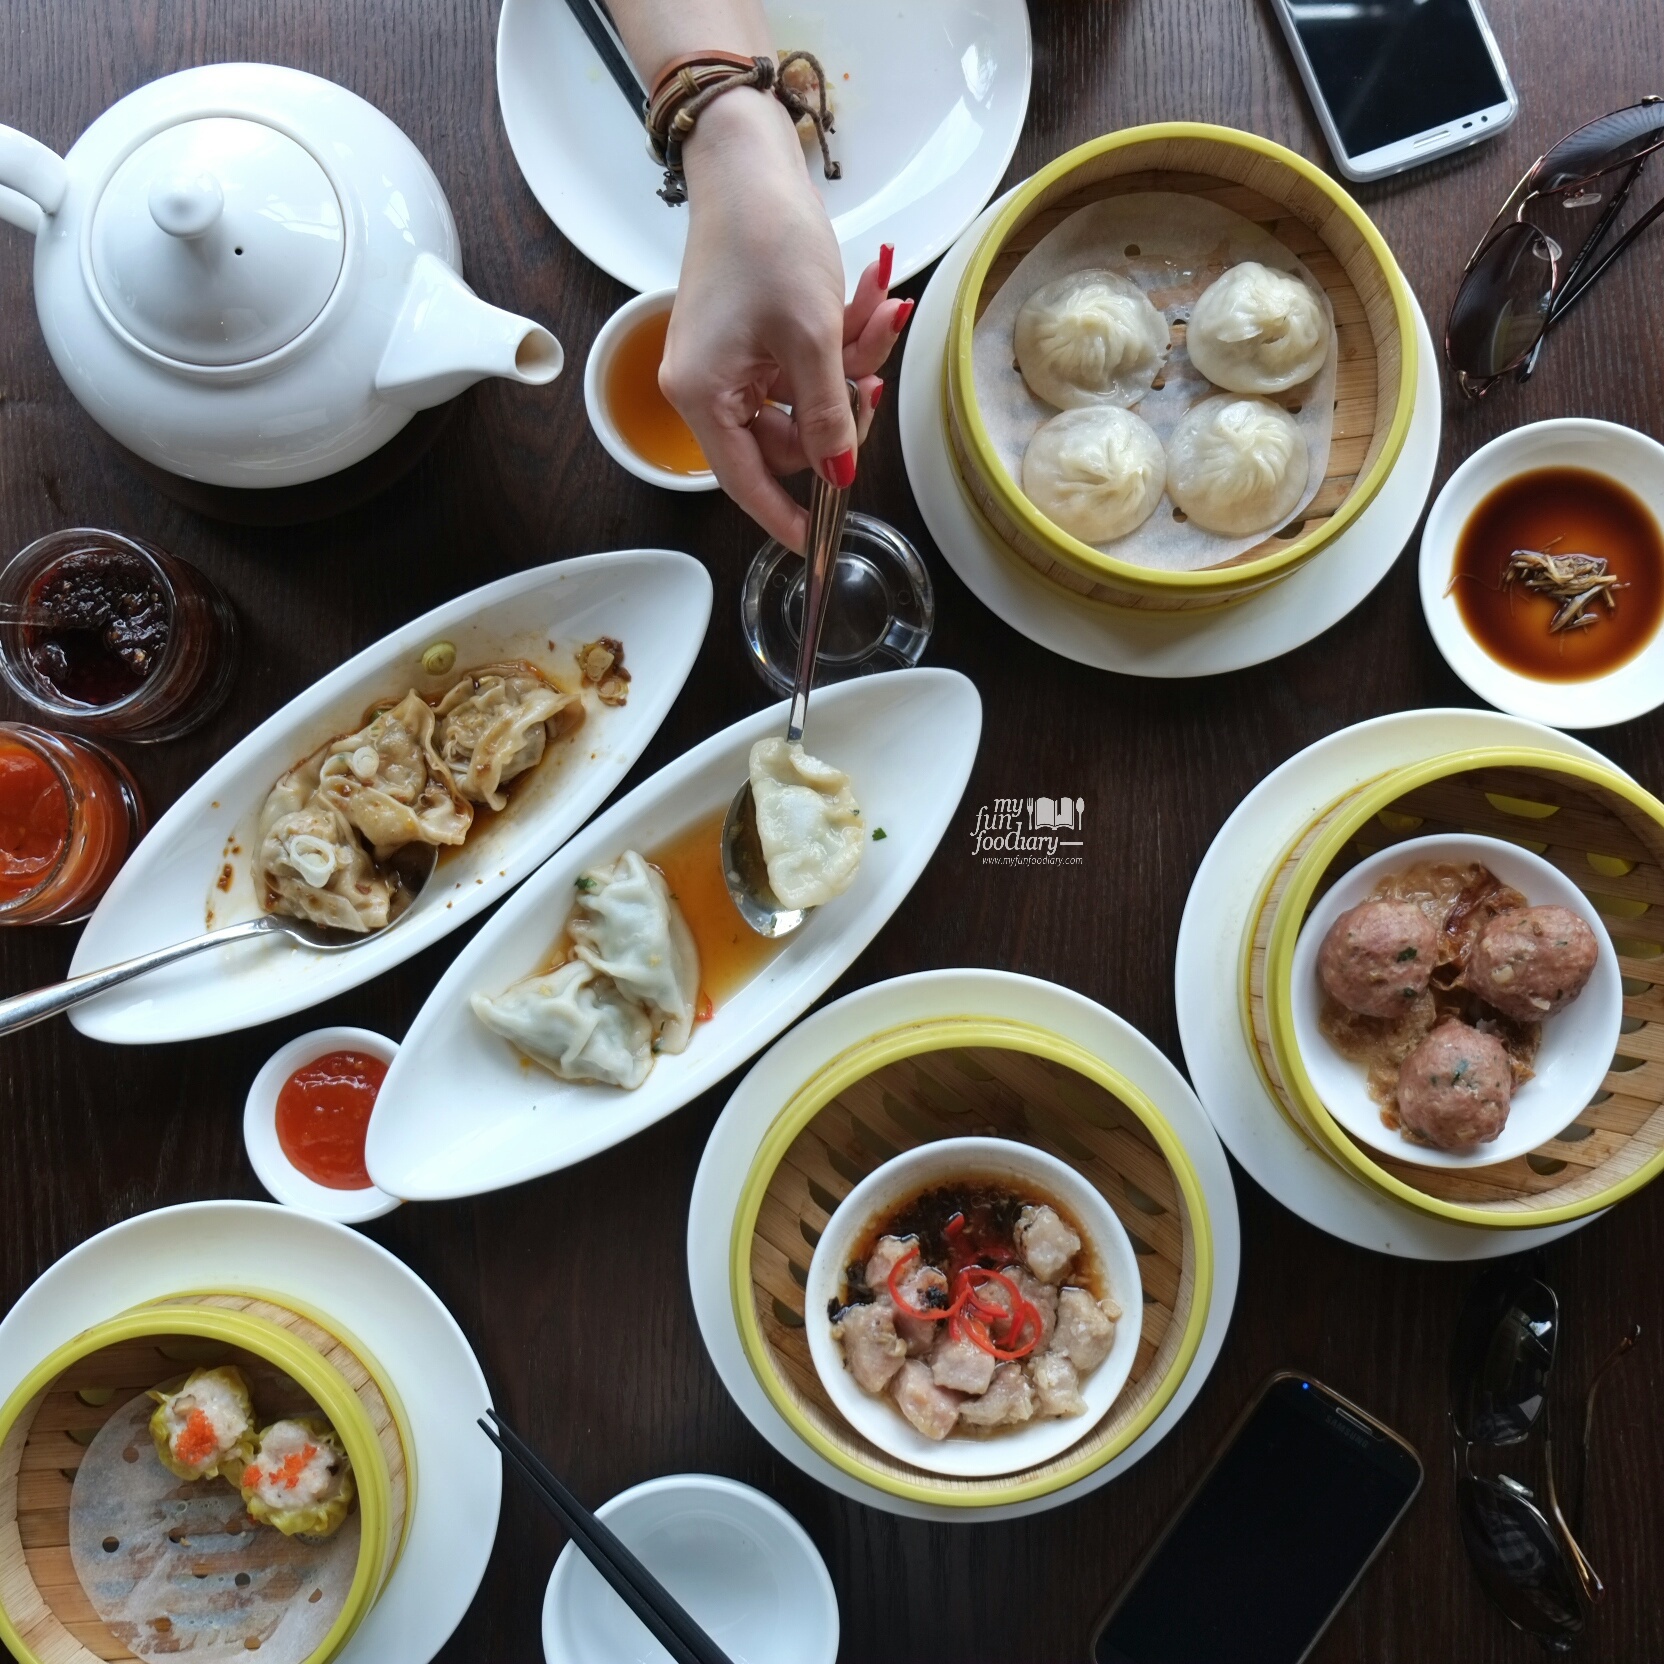 Dimsum Lunch at 48 Signature Restaurant PIK by Myfunfoodiary